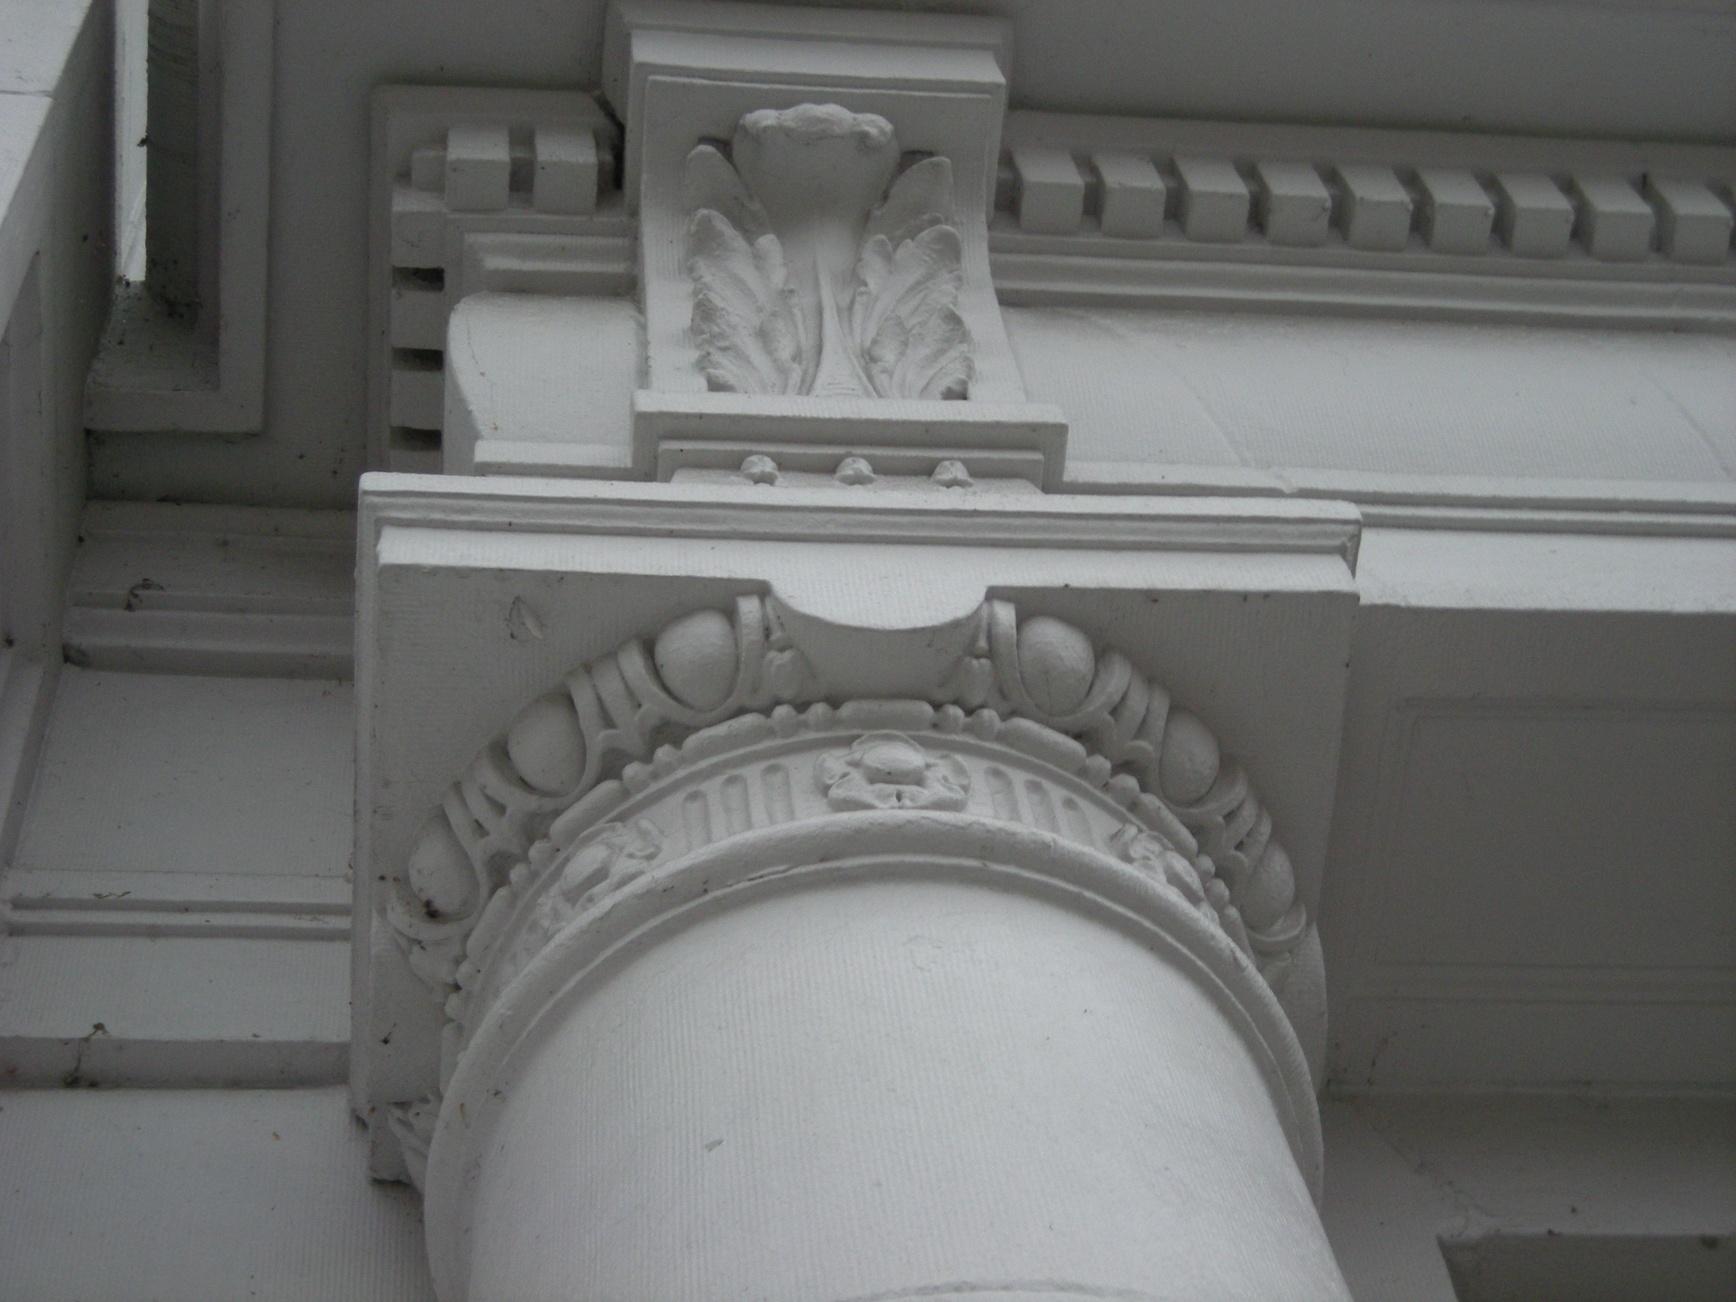 The column of the front door of the library